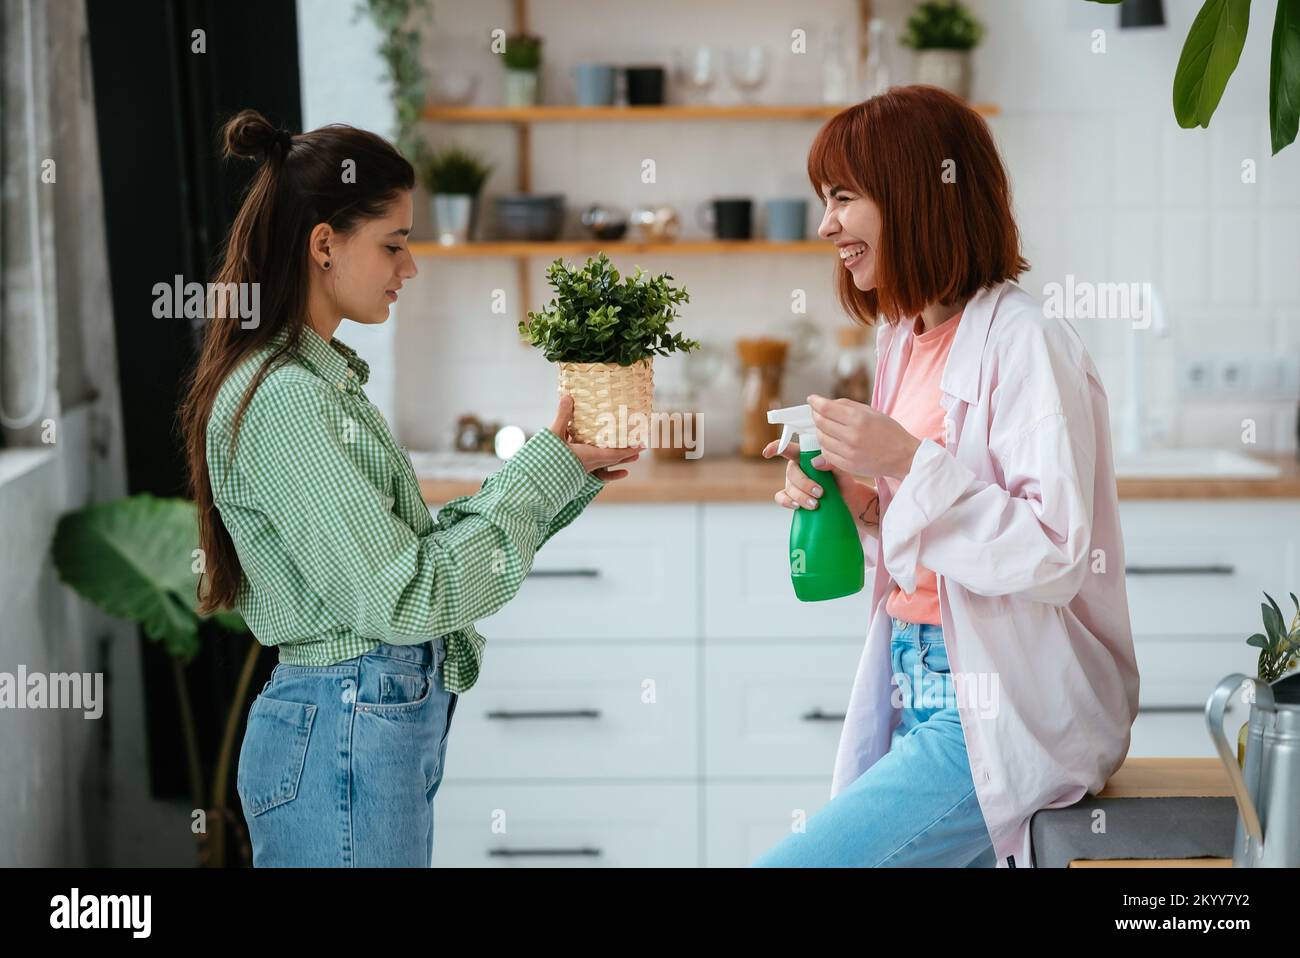 Two women is taking care of houseplants spraying with water. Stock Photo